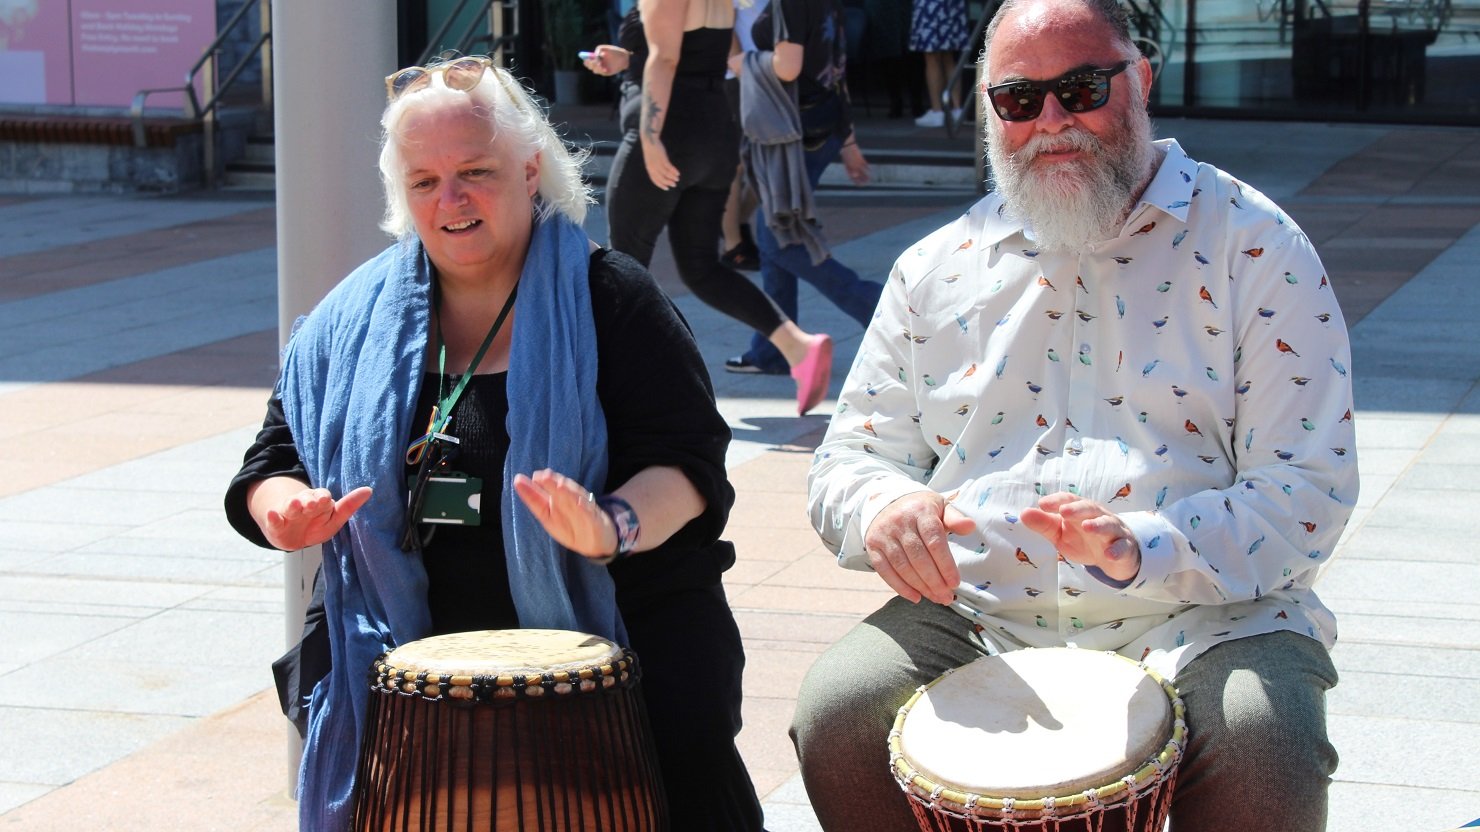 Councillor Jemima Laing drumming at The Bazaar event at The Box, Plymouth, summer 2023